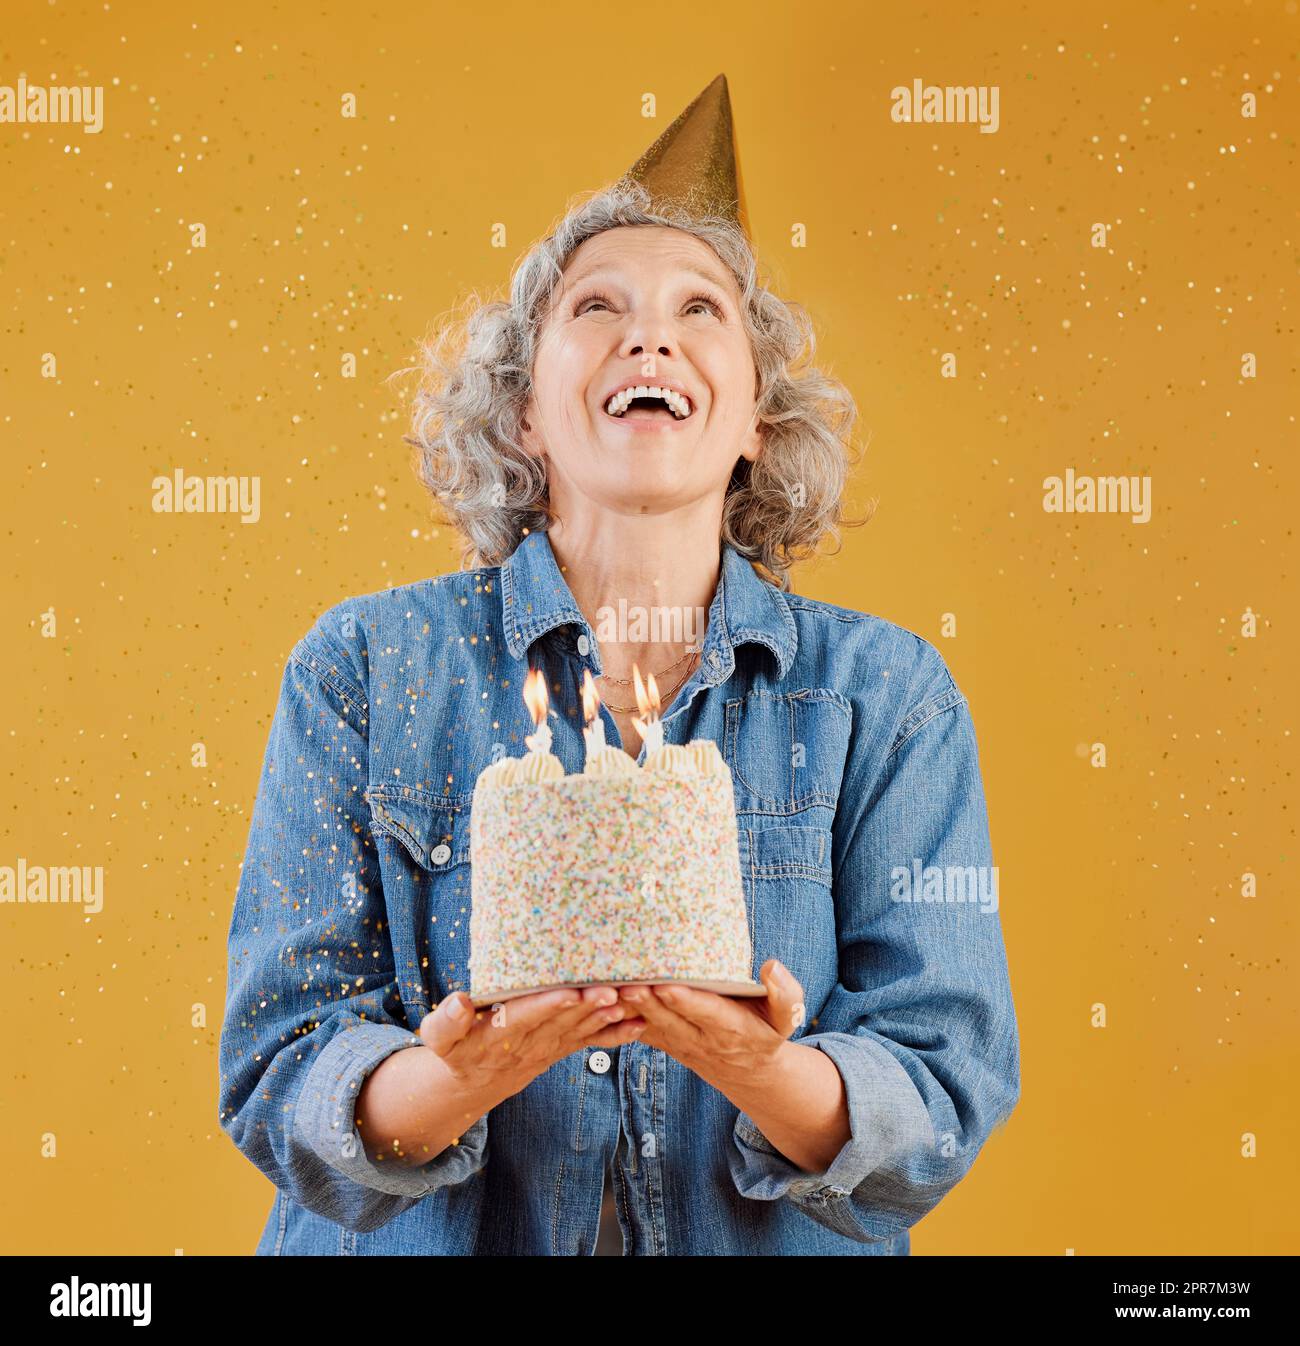 One happy mature caucasian woman wearing a birthday hat and holding a cake while confetti falls from above against a yellow background in the studio. Smiling white lady celebrating another year Stock Photo